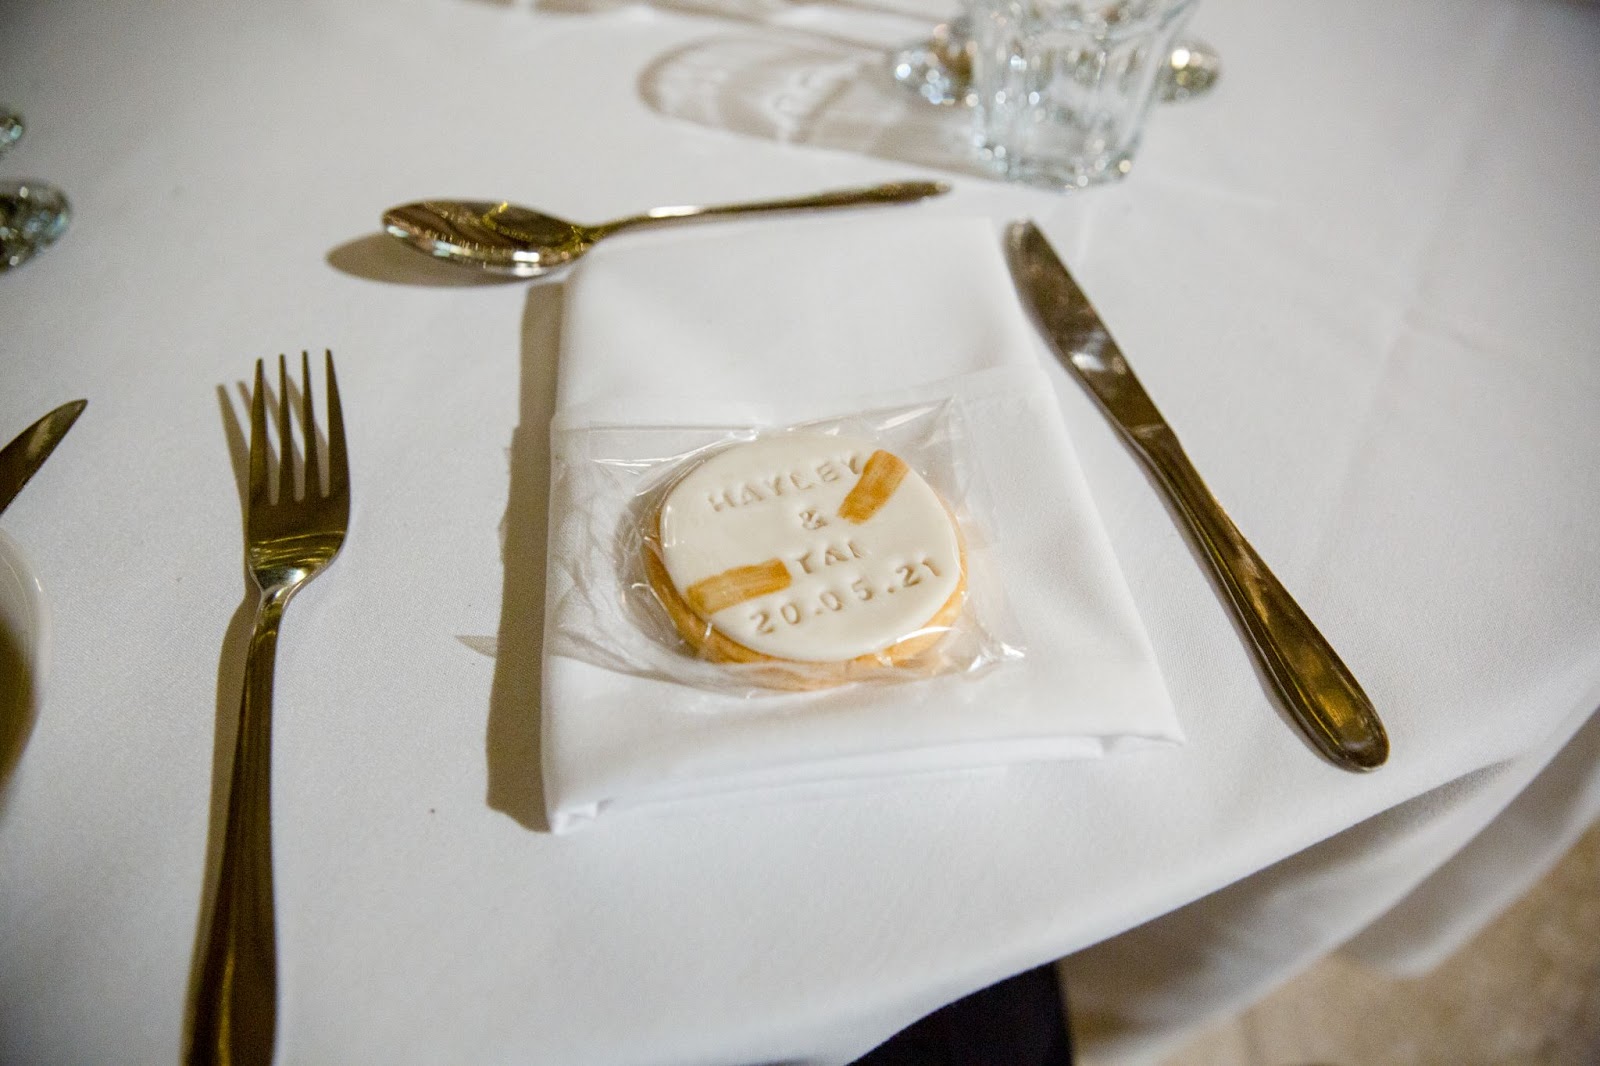 Customised cookie for wedding guests.